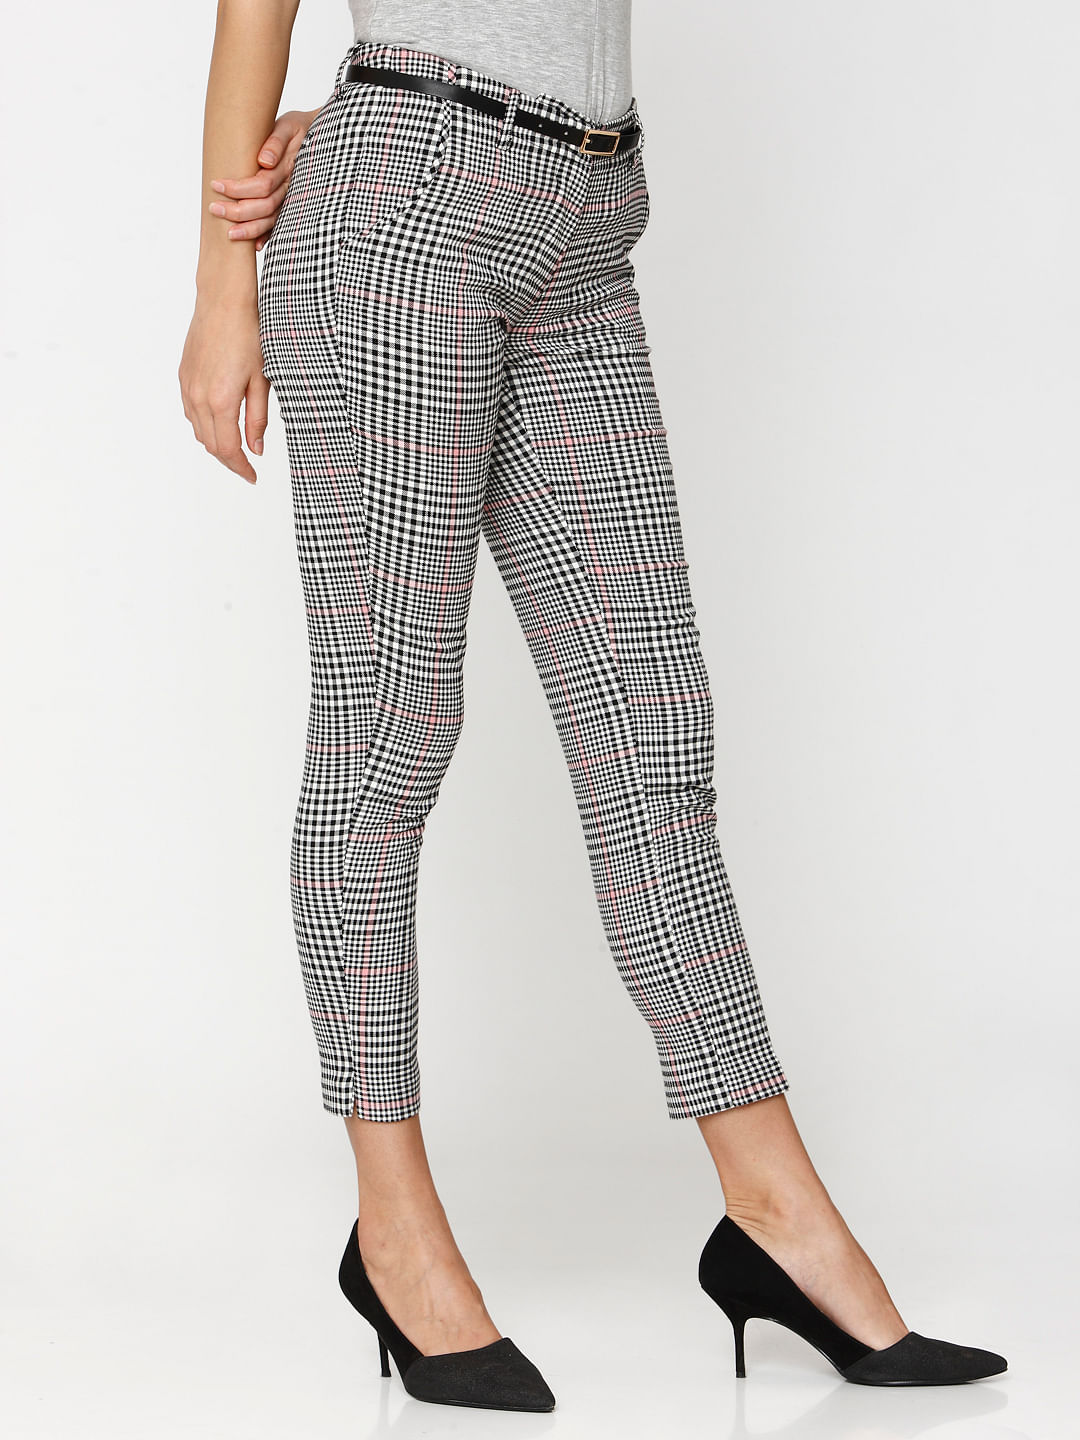 martin smith formal pants | Mens trousers formal, Formal pants, Ankle pants